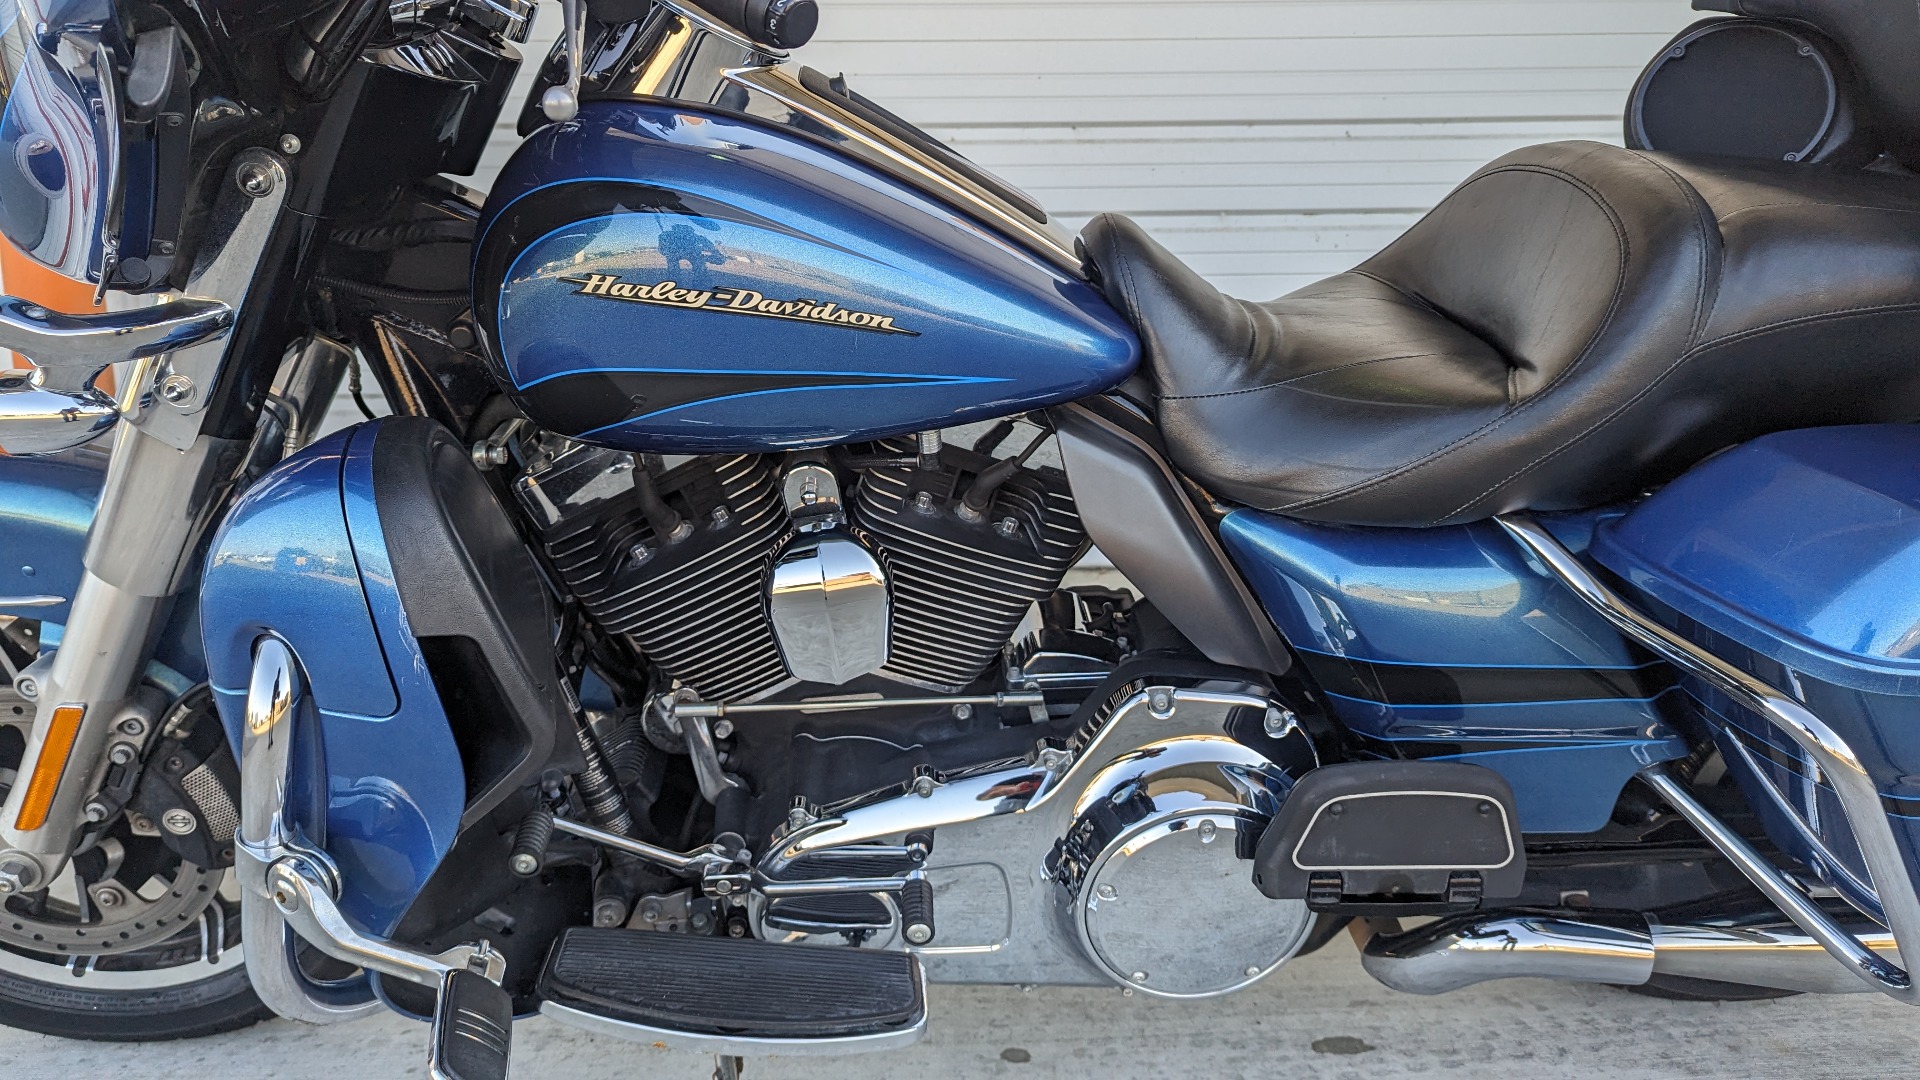 2014 harley davidson ultra limited for sale in dallas - Photo 7